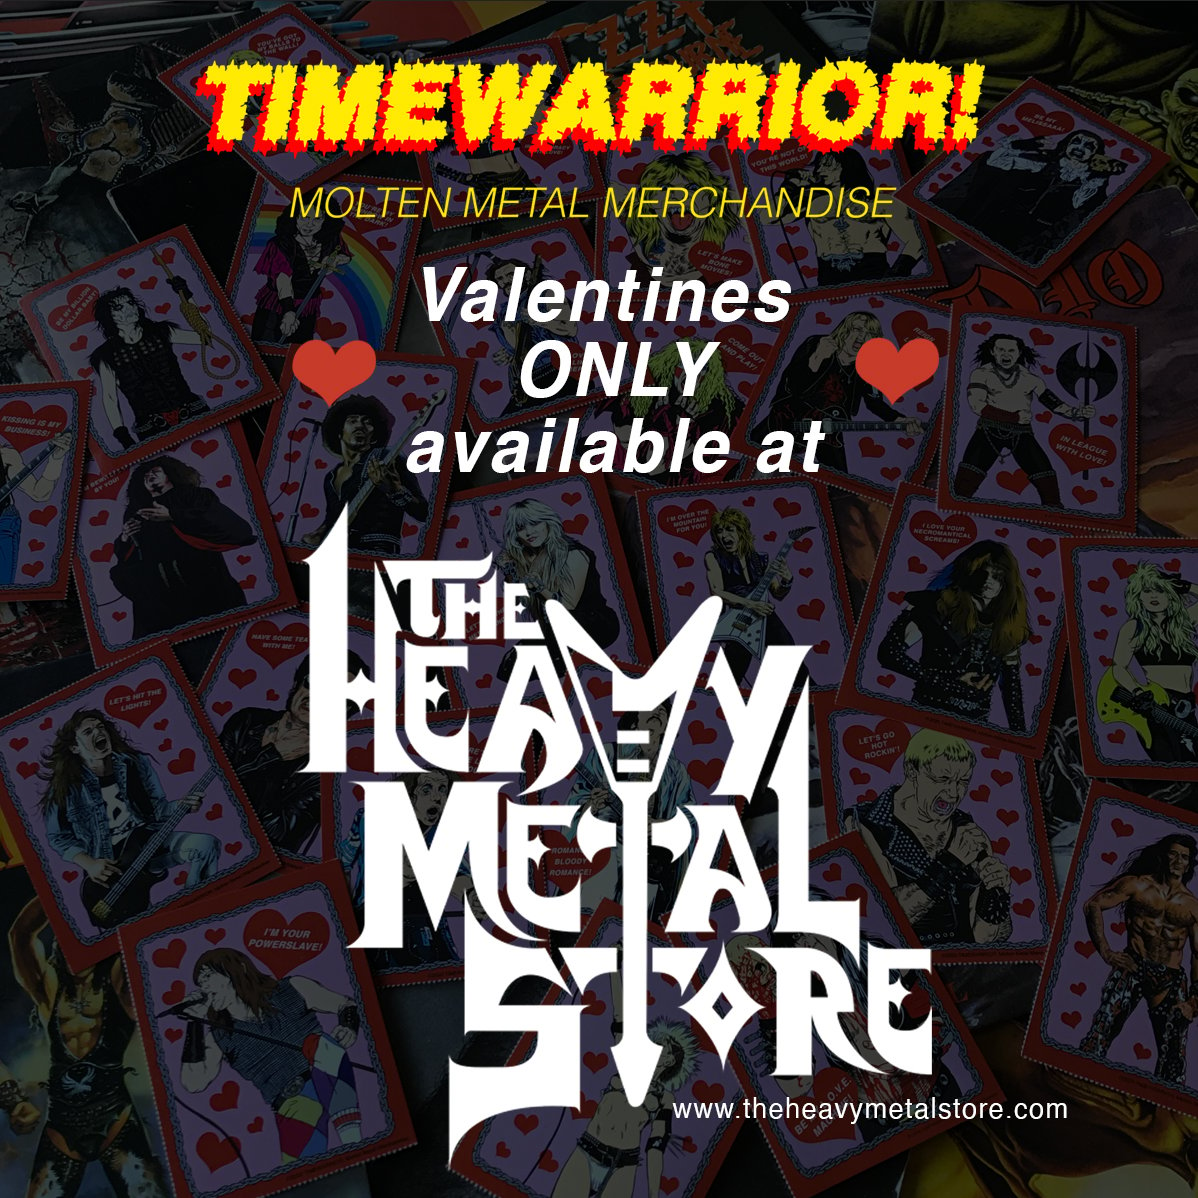 Image of Heavy Metal Heroes Valentine's Day Cards